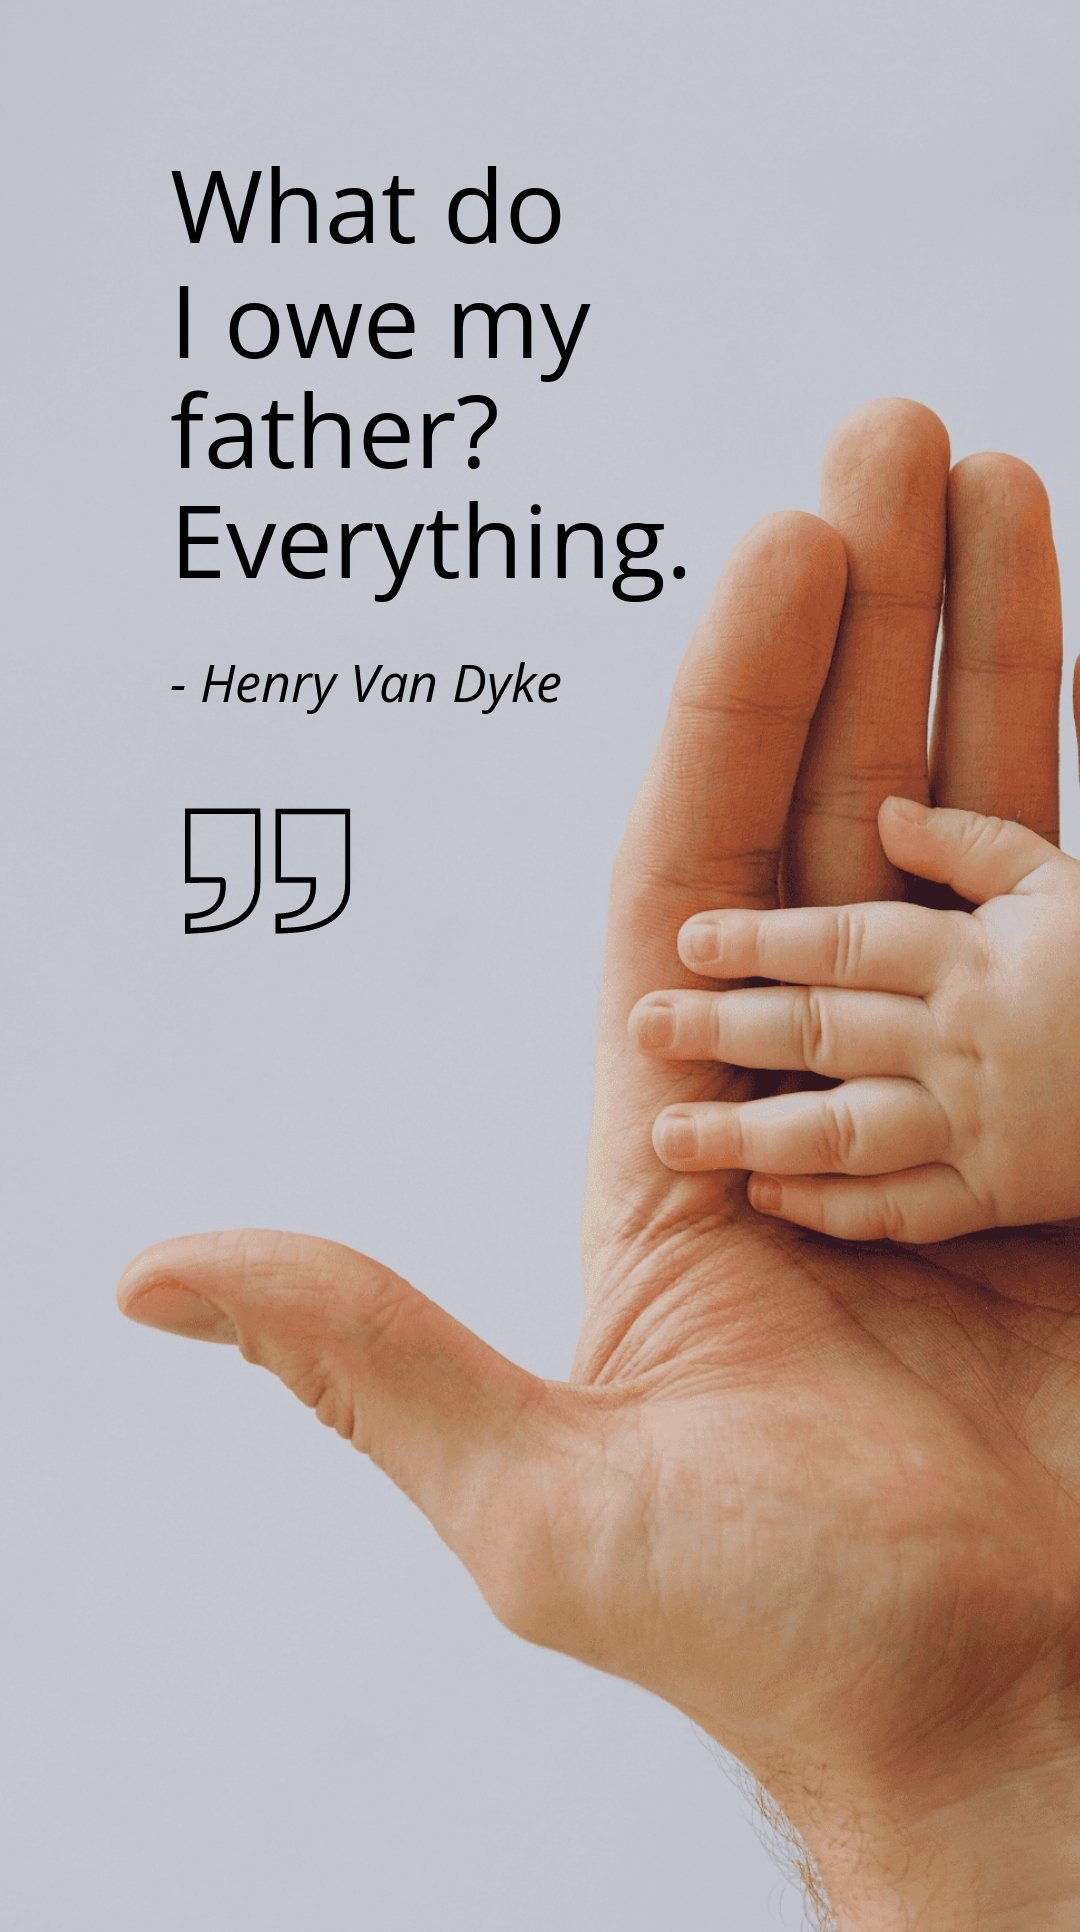 Free Henry Van Dyke - What do I owe my father? Everything. in JPG